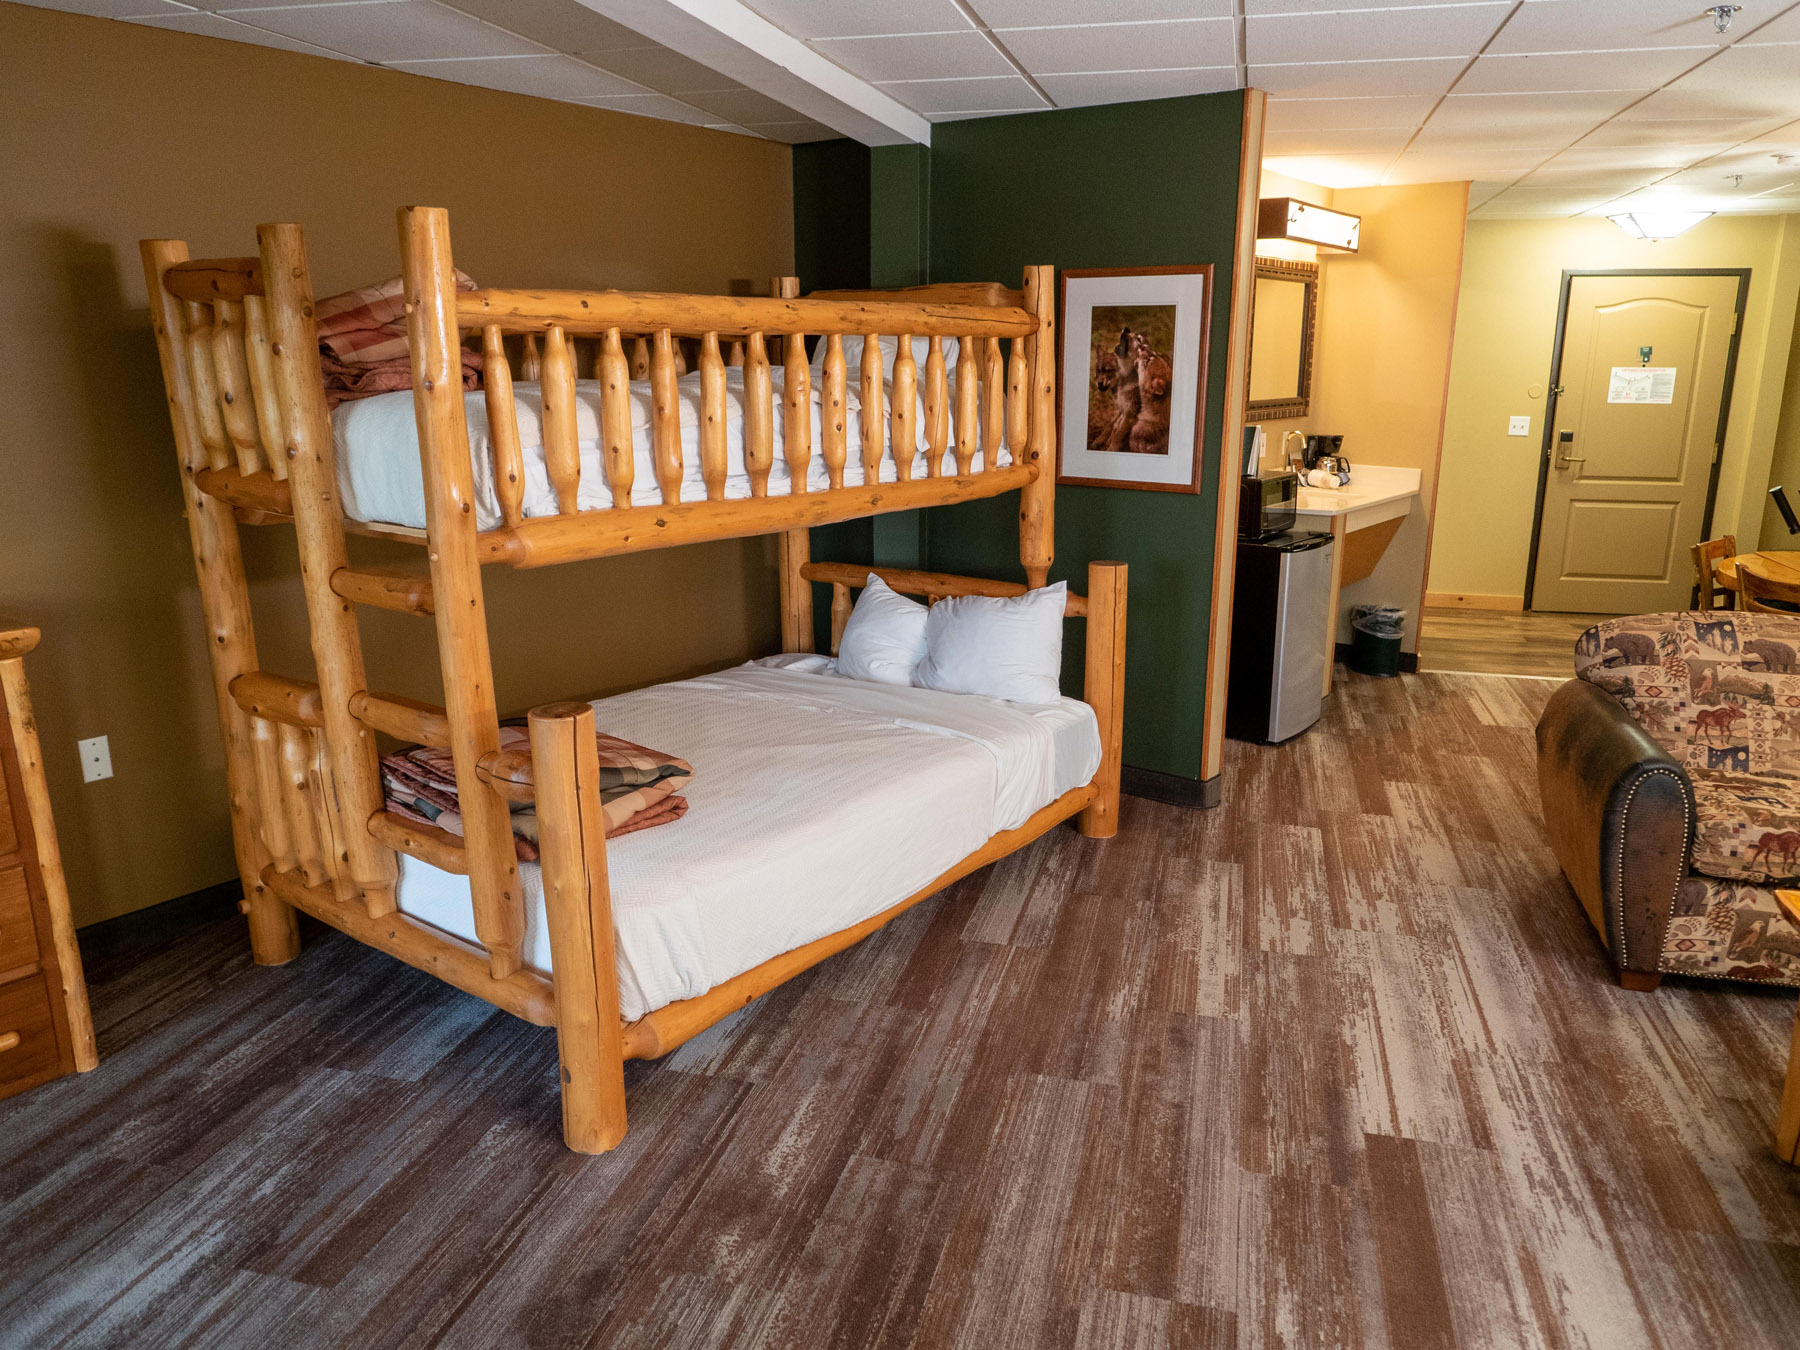 Kids' one-room suite with wooden bunk beds and couch